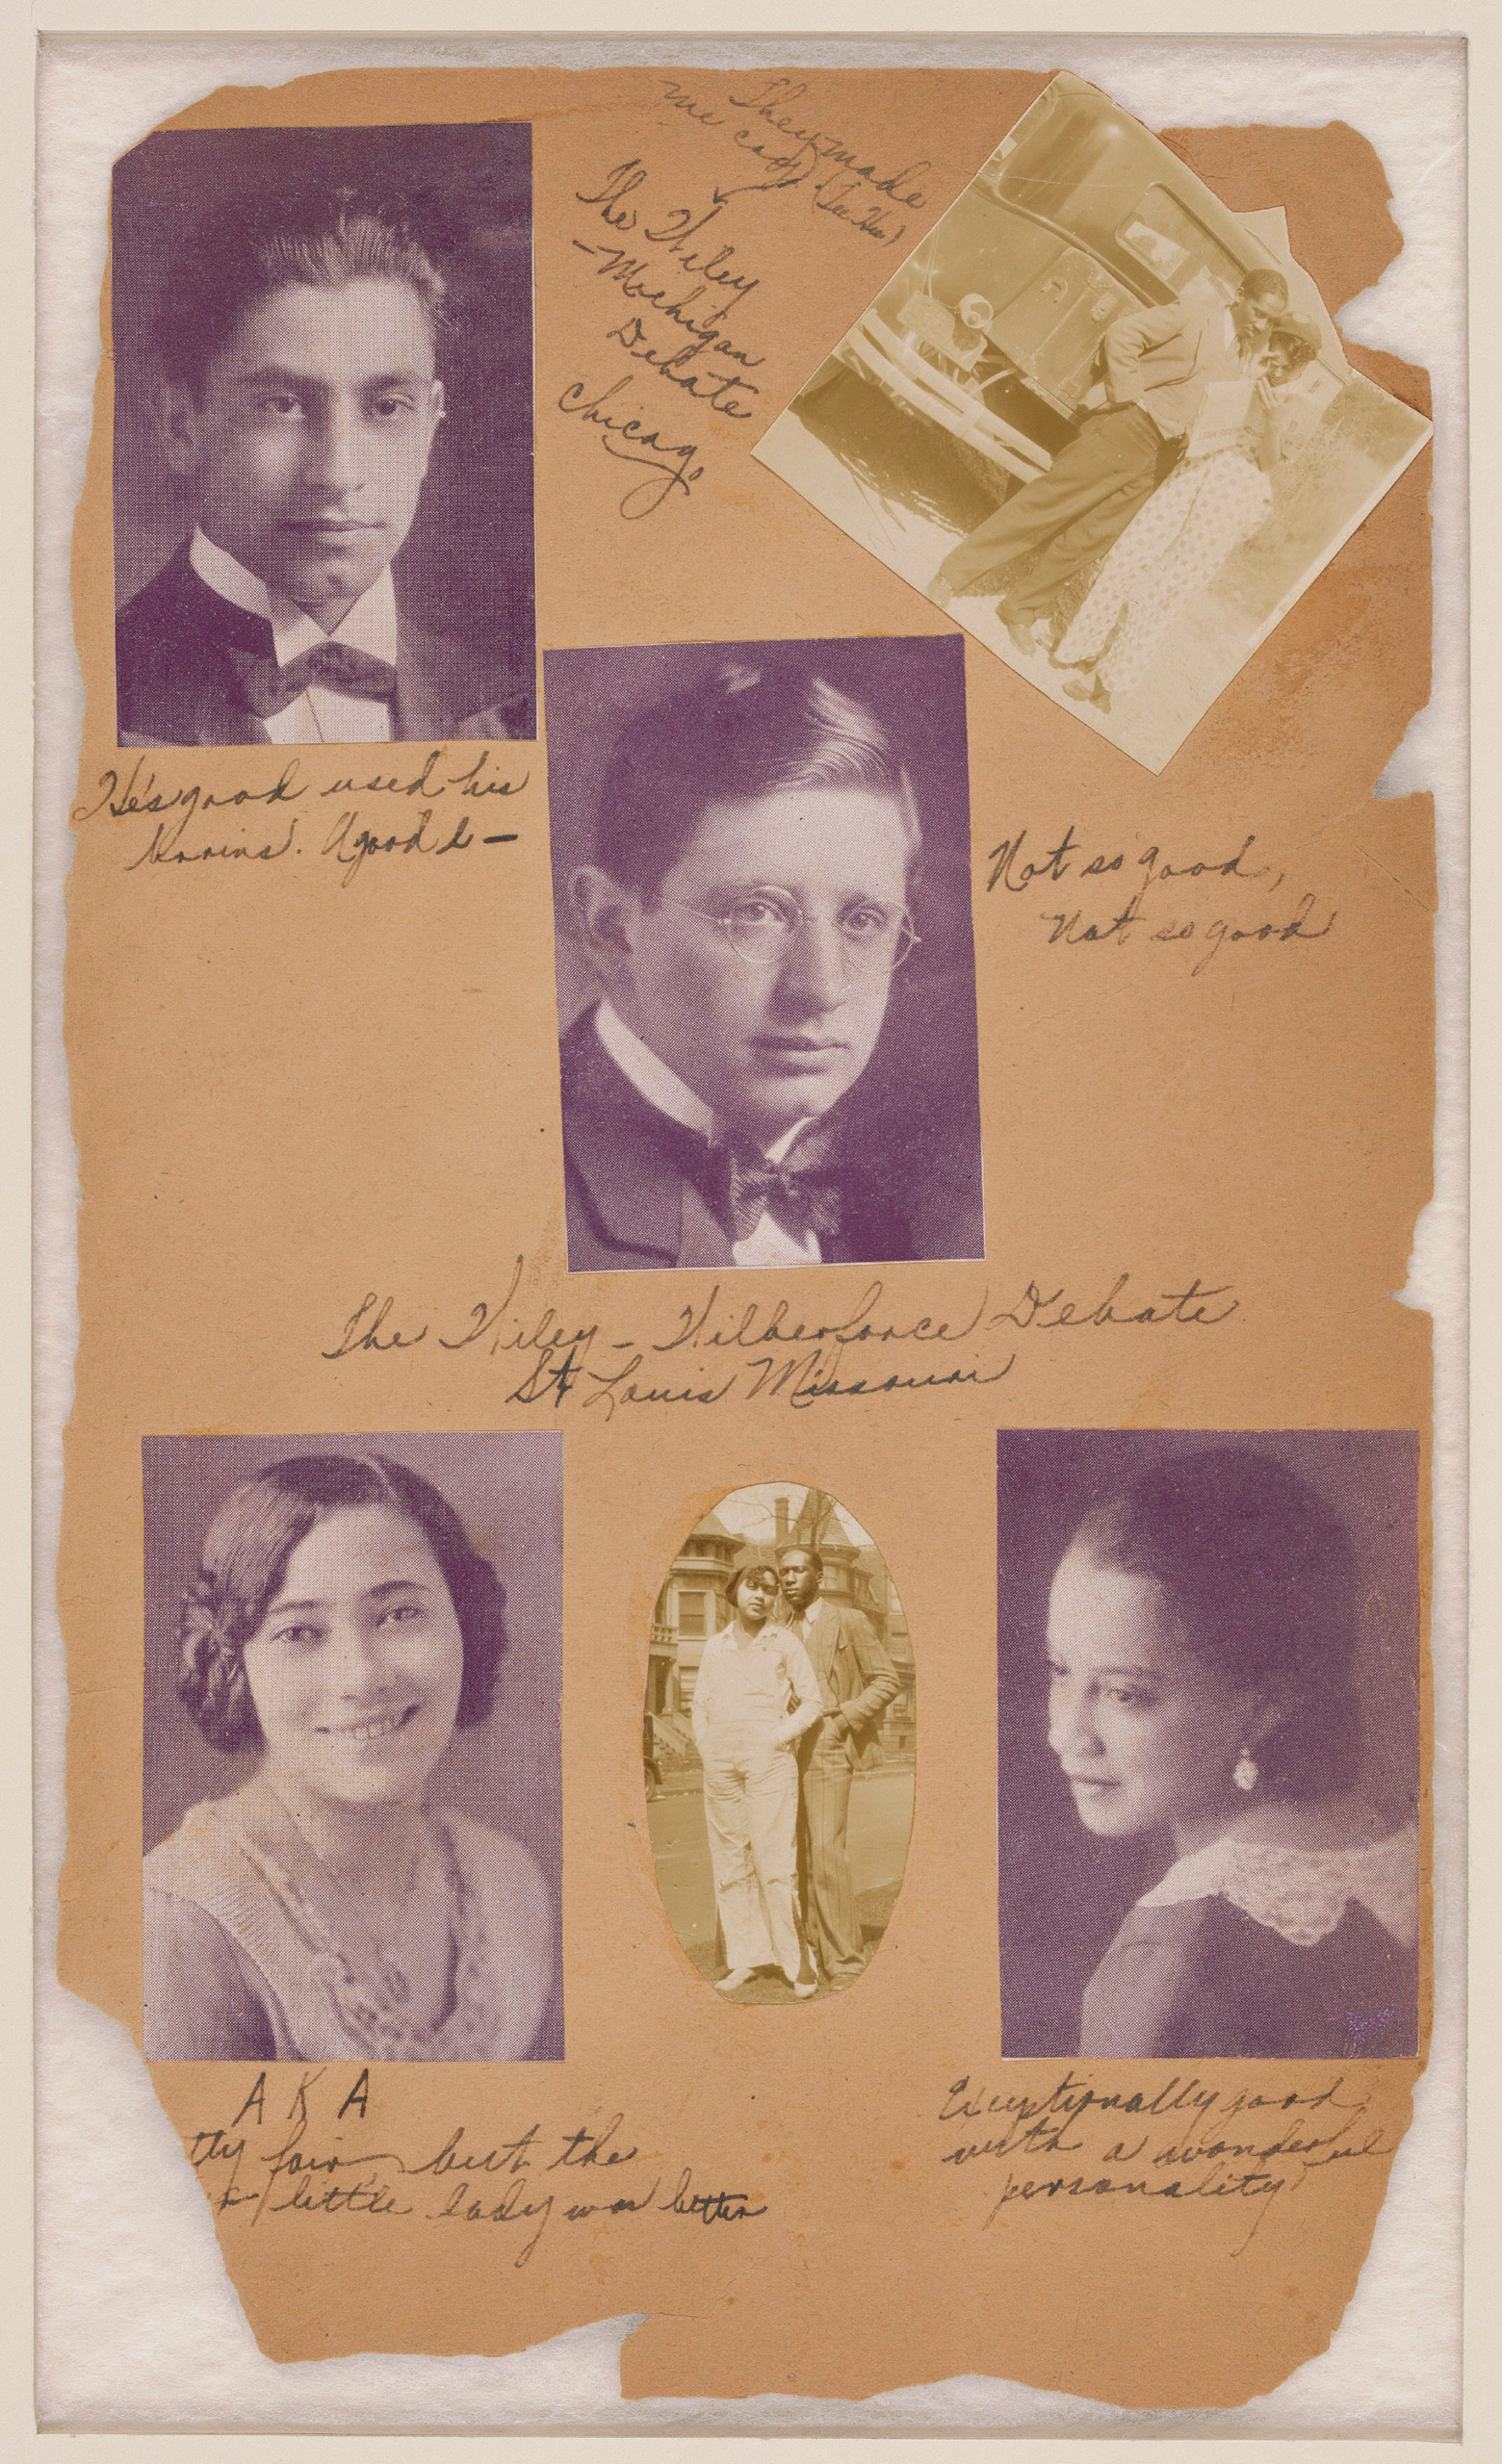 Scrapbook page about the Wiley College Debate Team, 1929-1930.